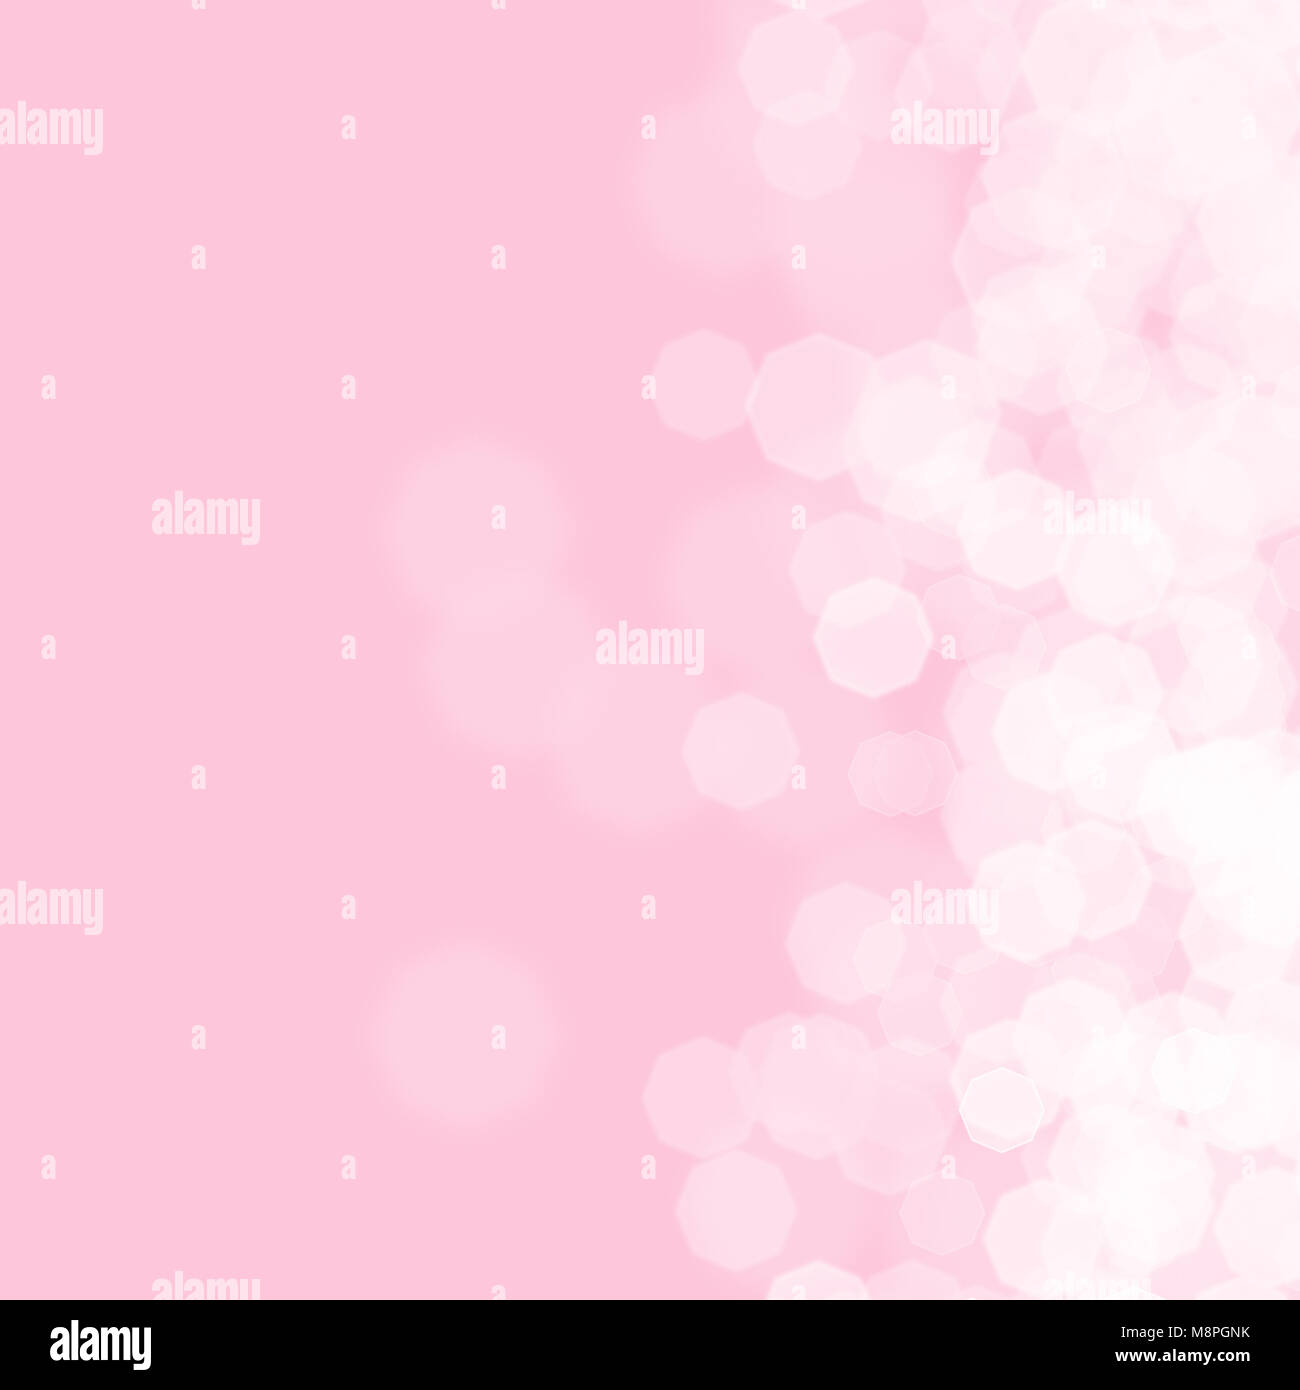 Abstract pink background for birthday card Stock Photo - Alamy